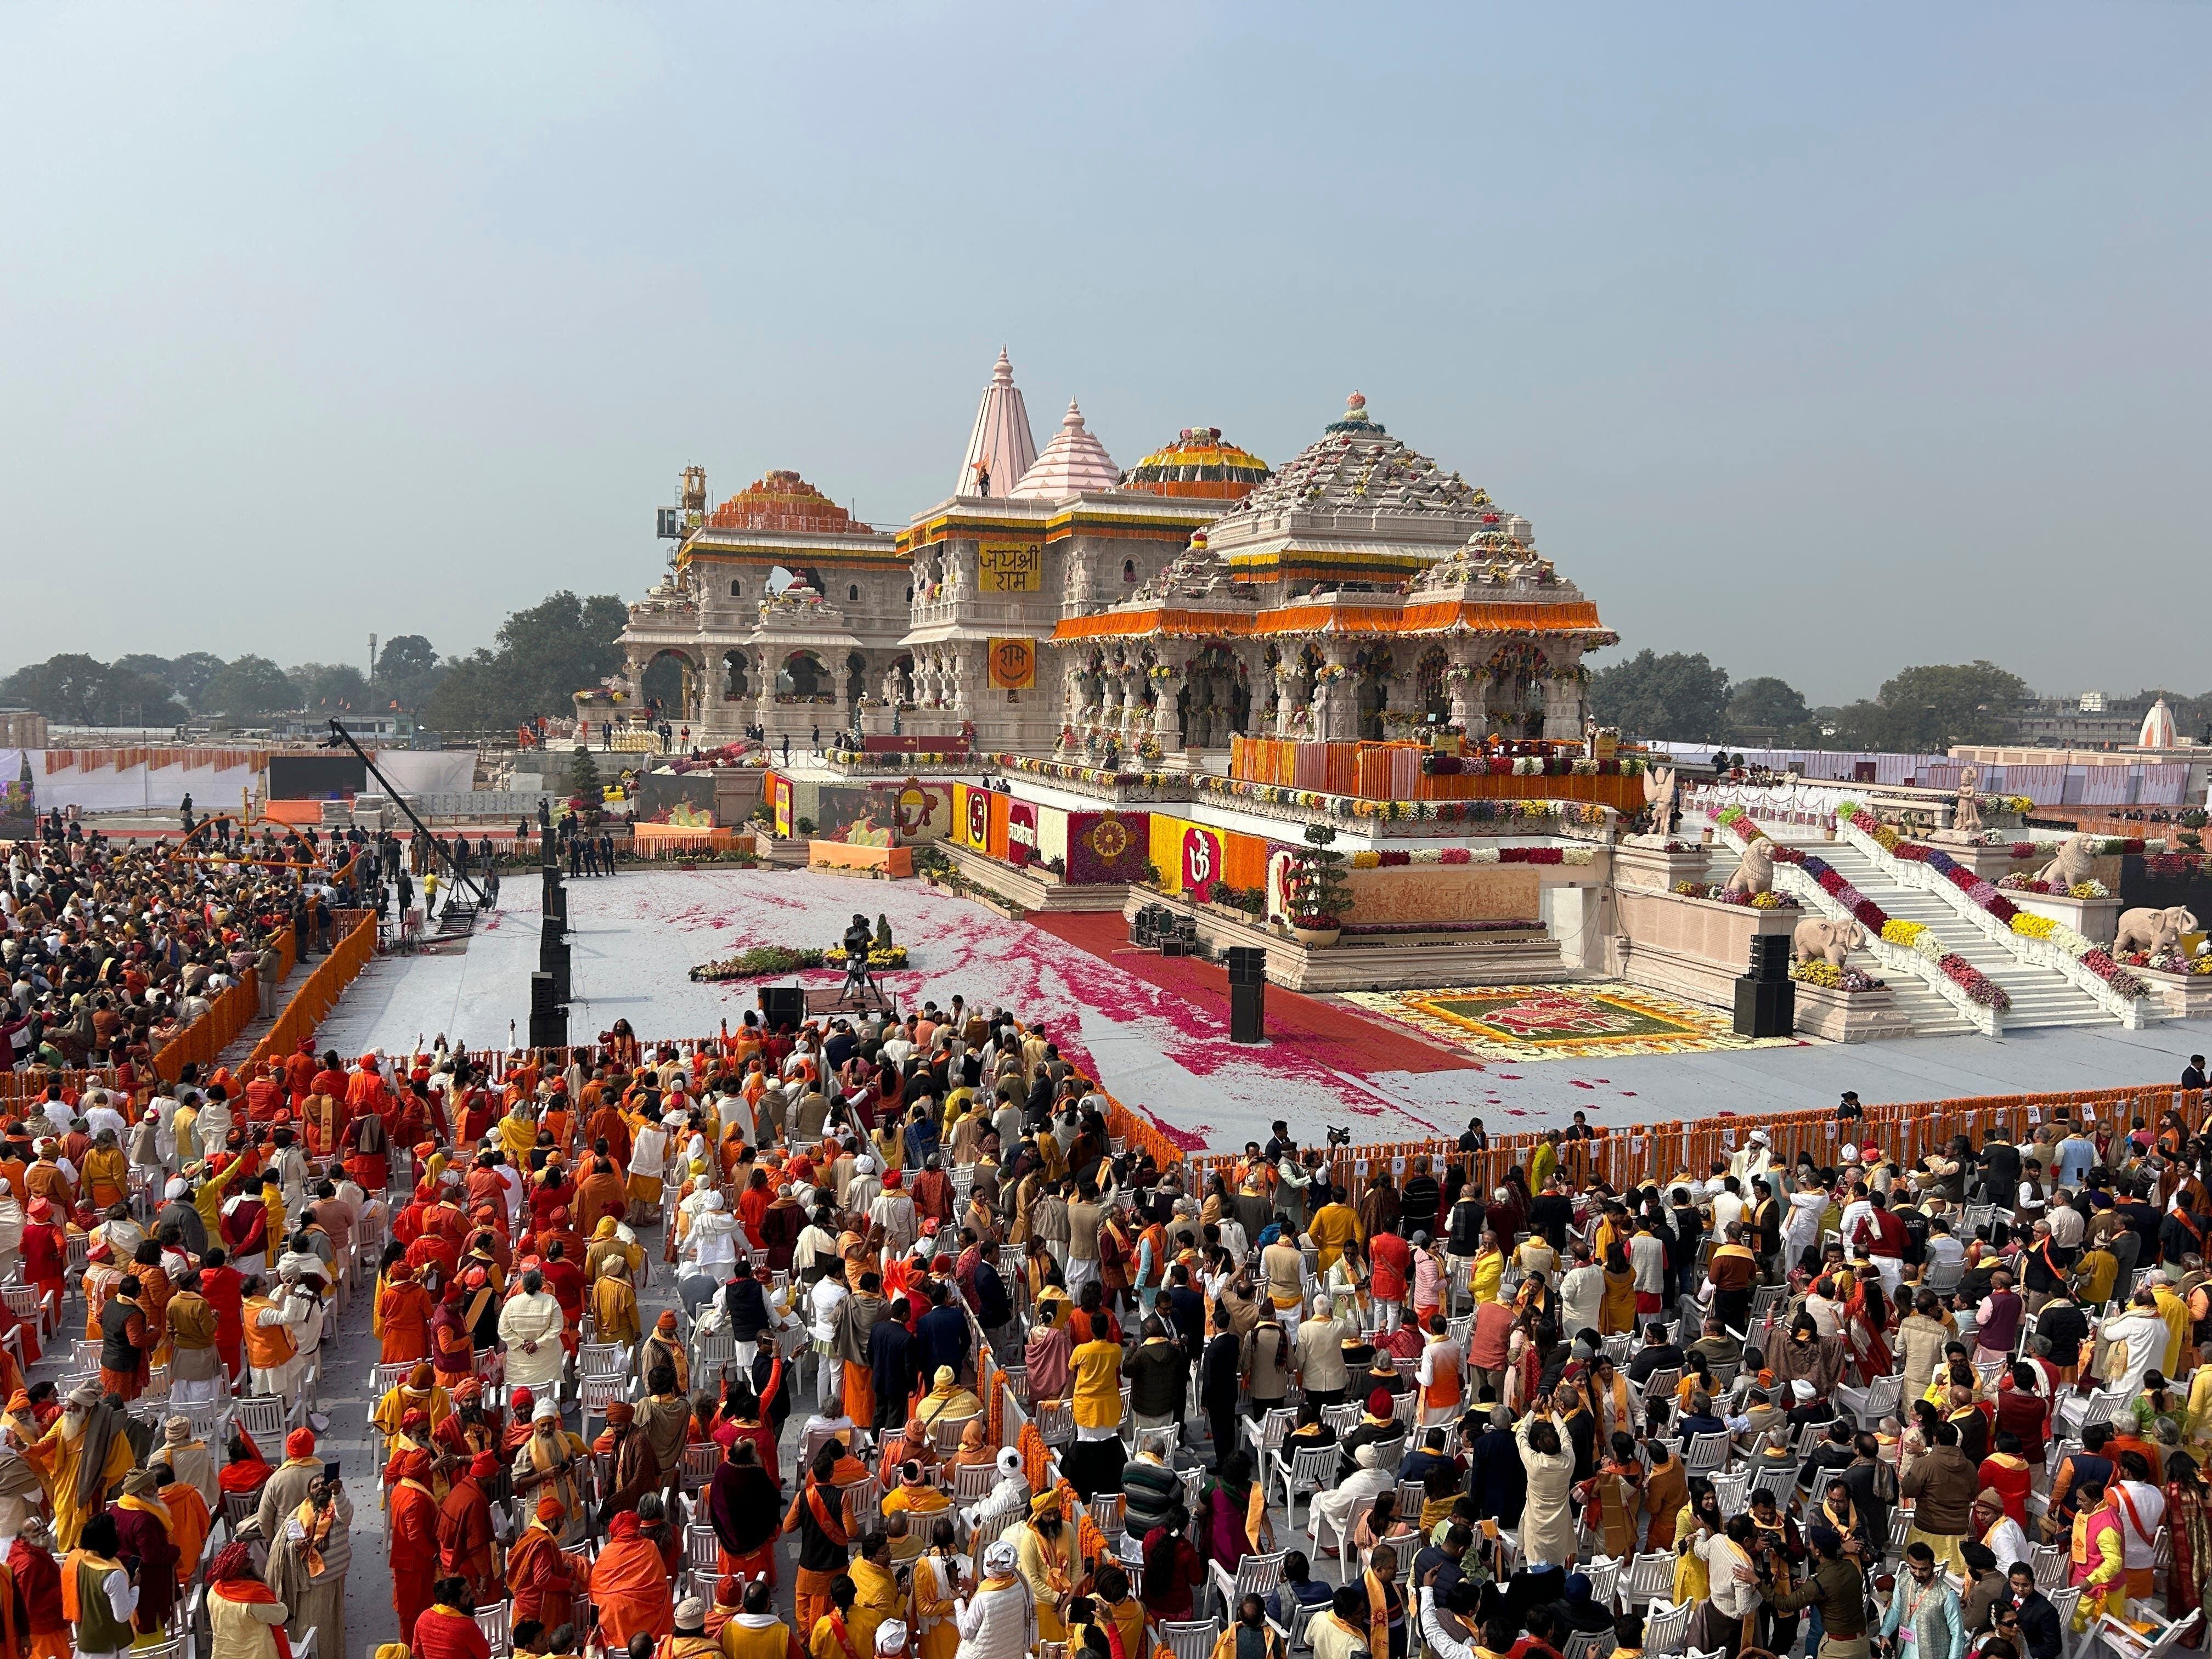 Modi opens controversial Hindu temple ahead of national polls in India